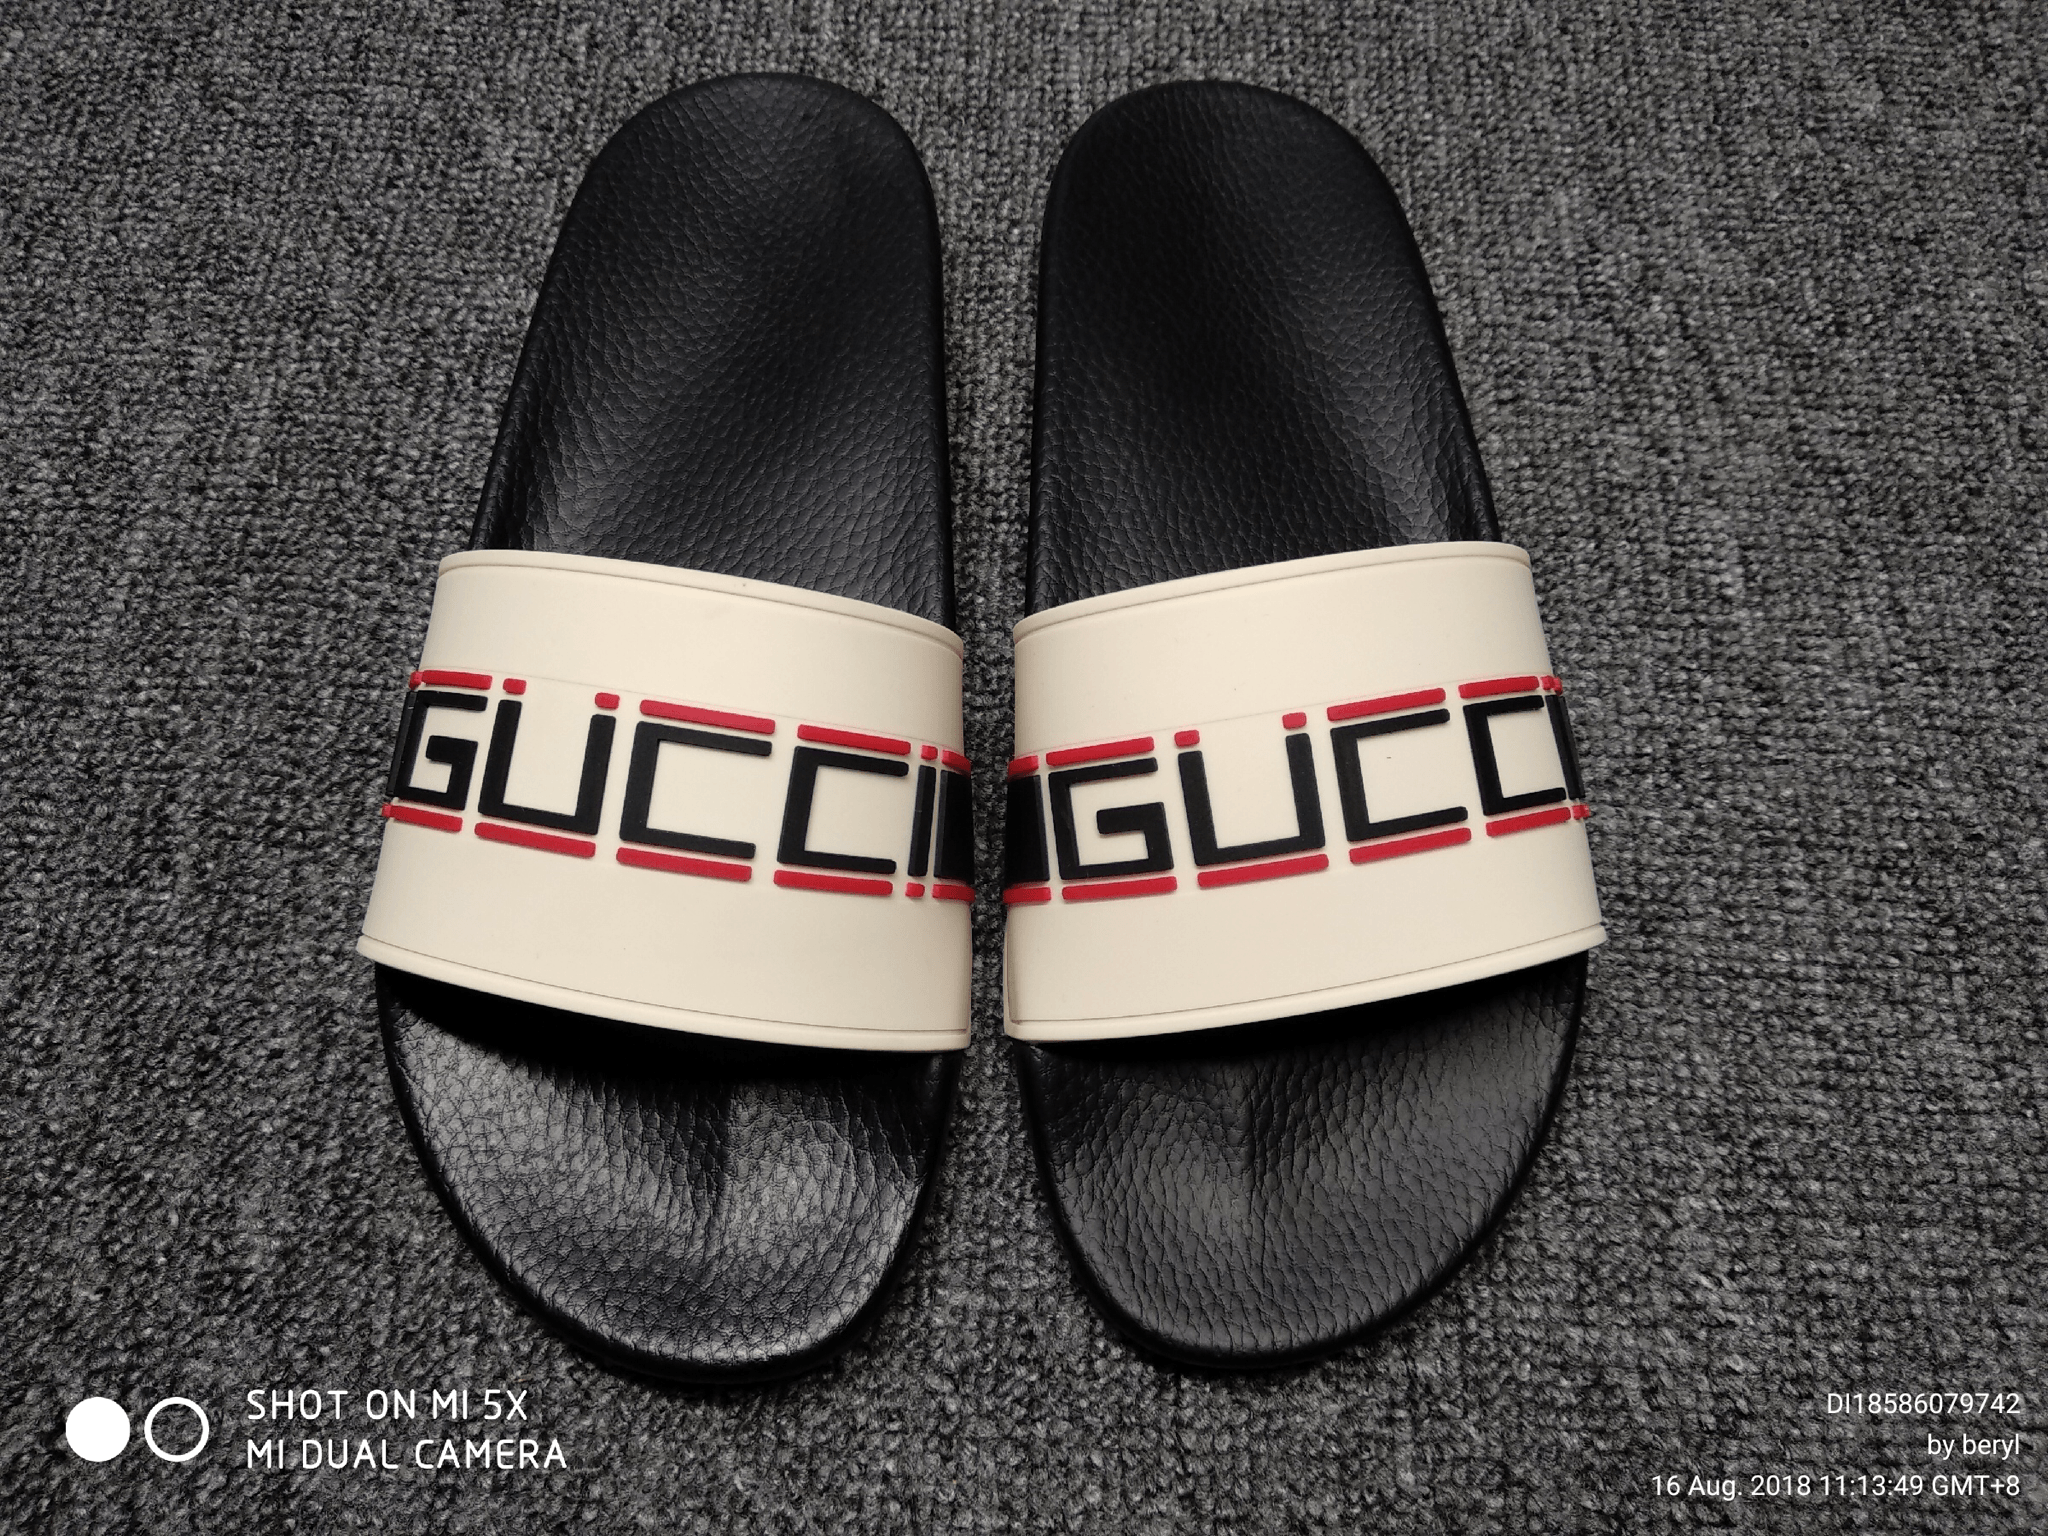 Boutta pipe up these thotties with my gucci slides